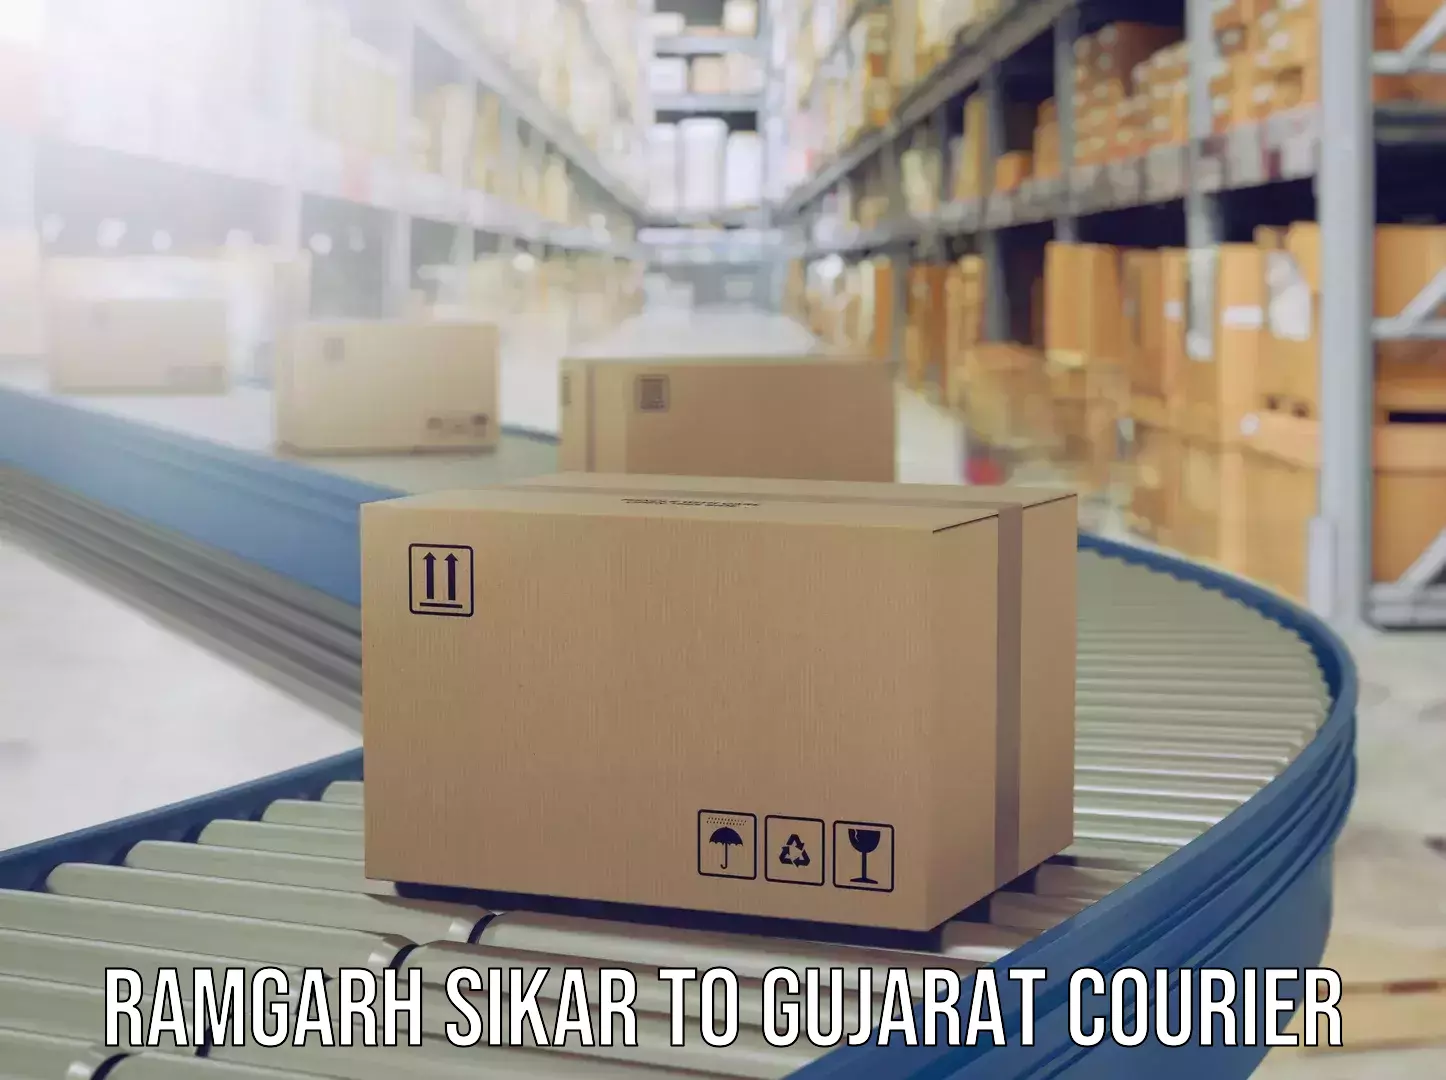 Luggage delivery providers Ramgarh Sikar to Gujarat